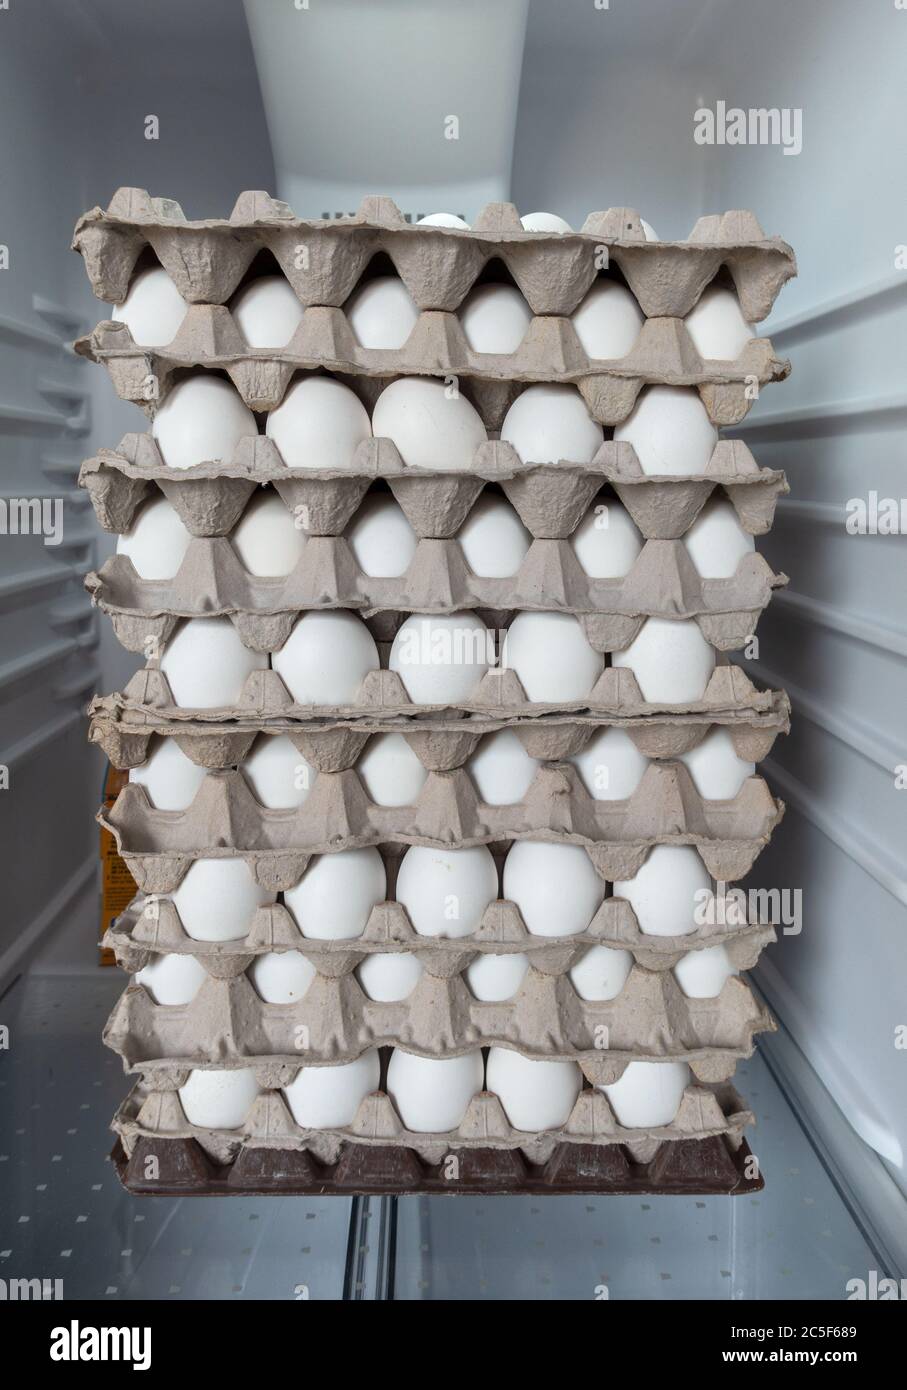 Flats Of Fresh Eggs Stored In A Refrigerator Moulded Paper Pulp Egg Trays Thirty Eggs In Each Flat Tray Stock Photo